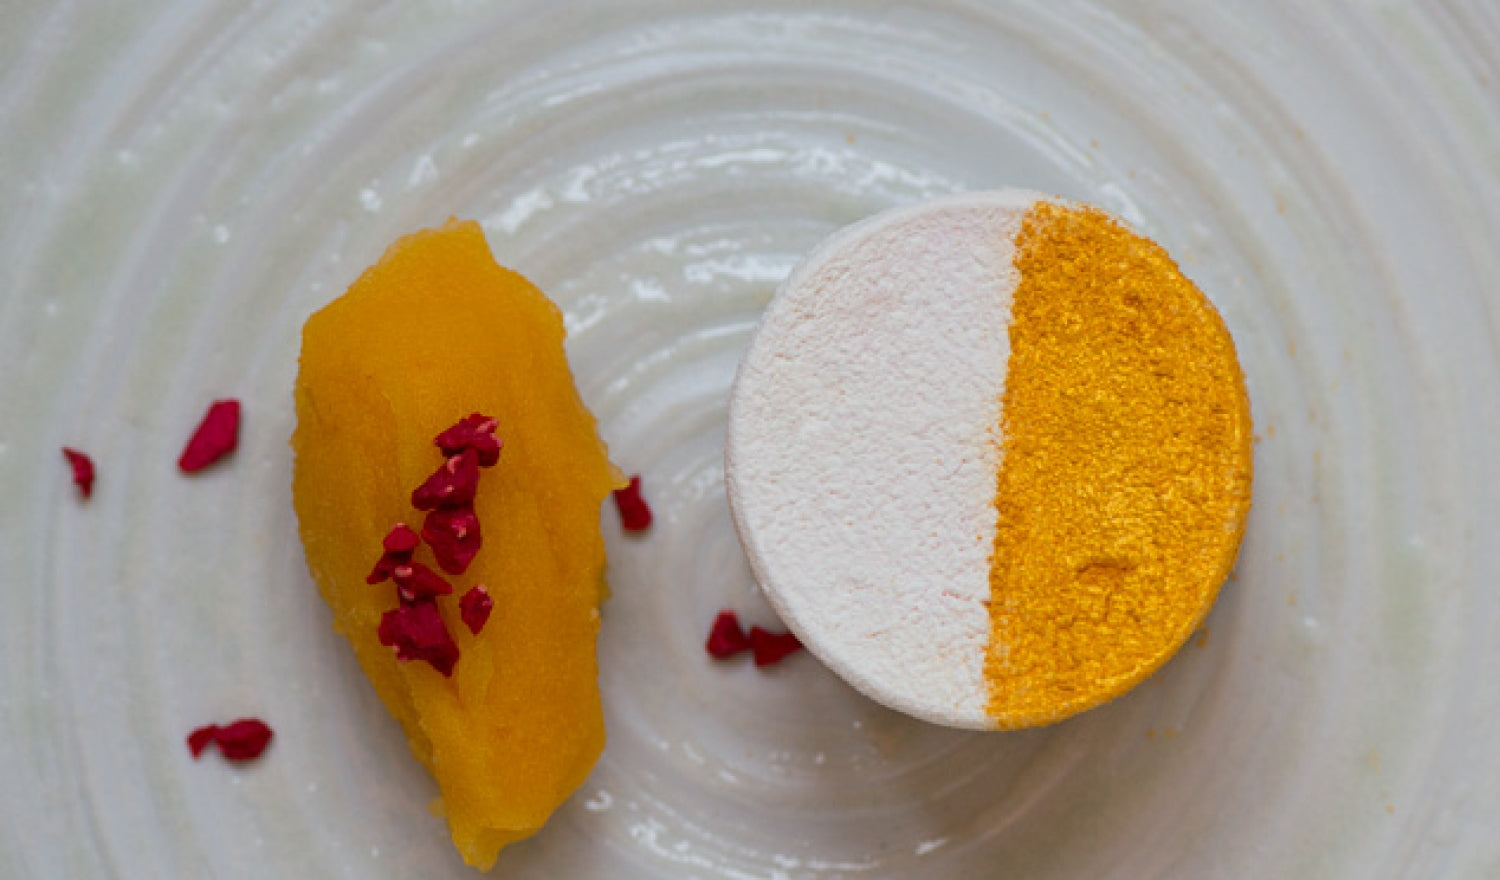 How To Use Velvet Spray: Flocking & A Passion Fruit Mousse